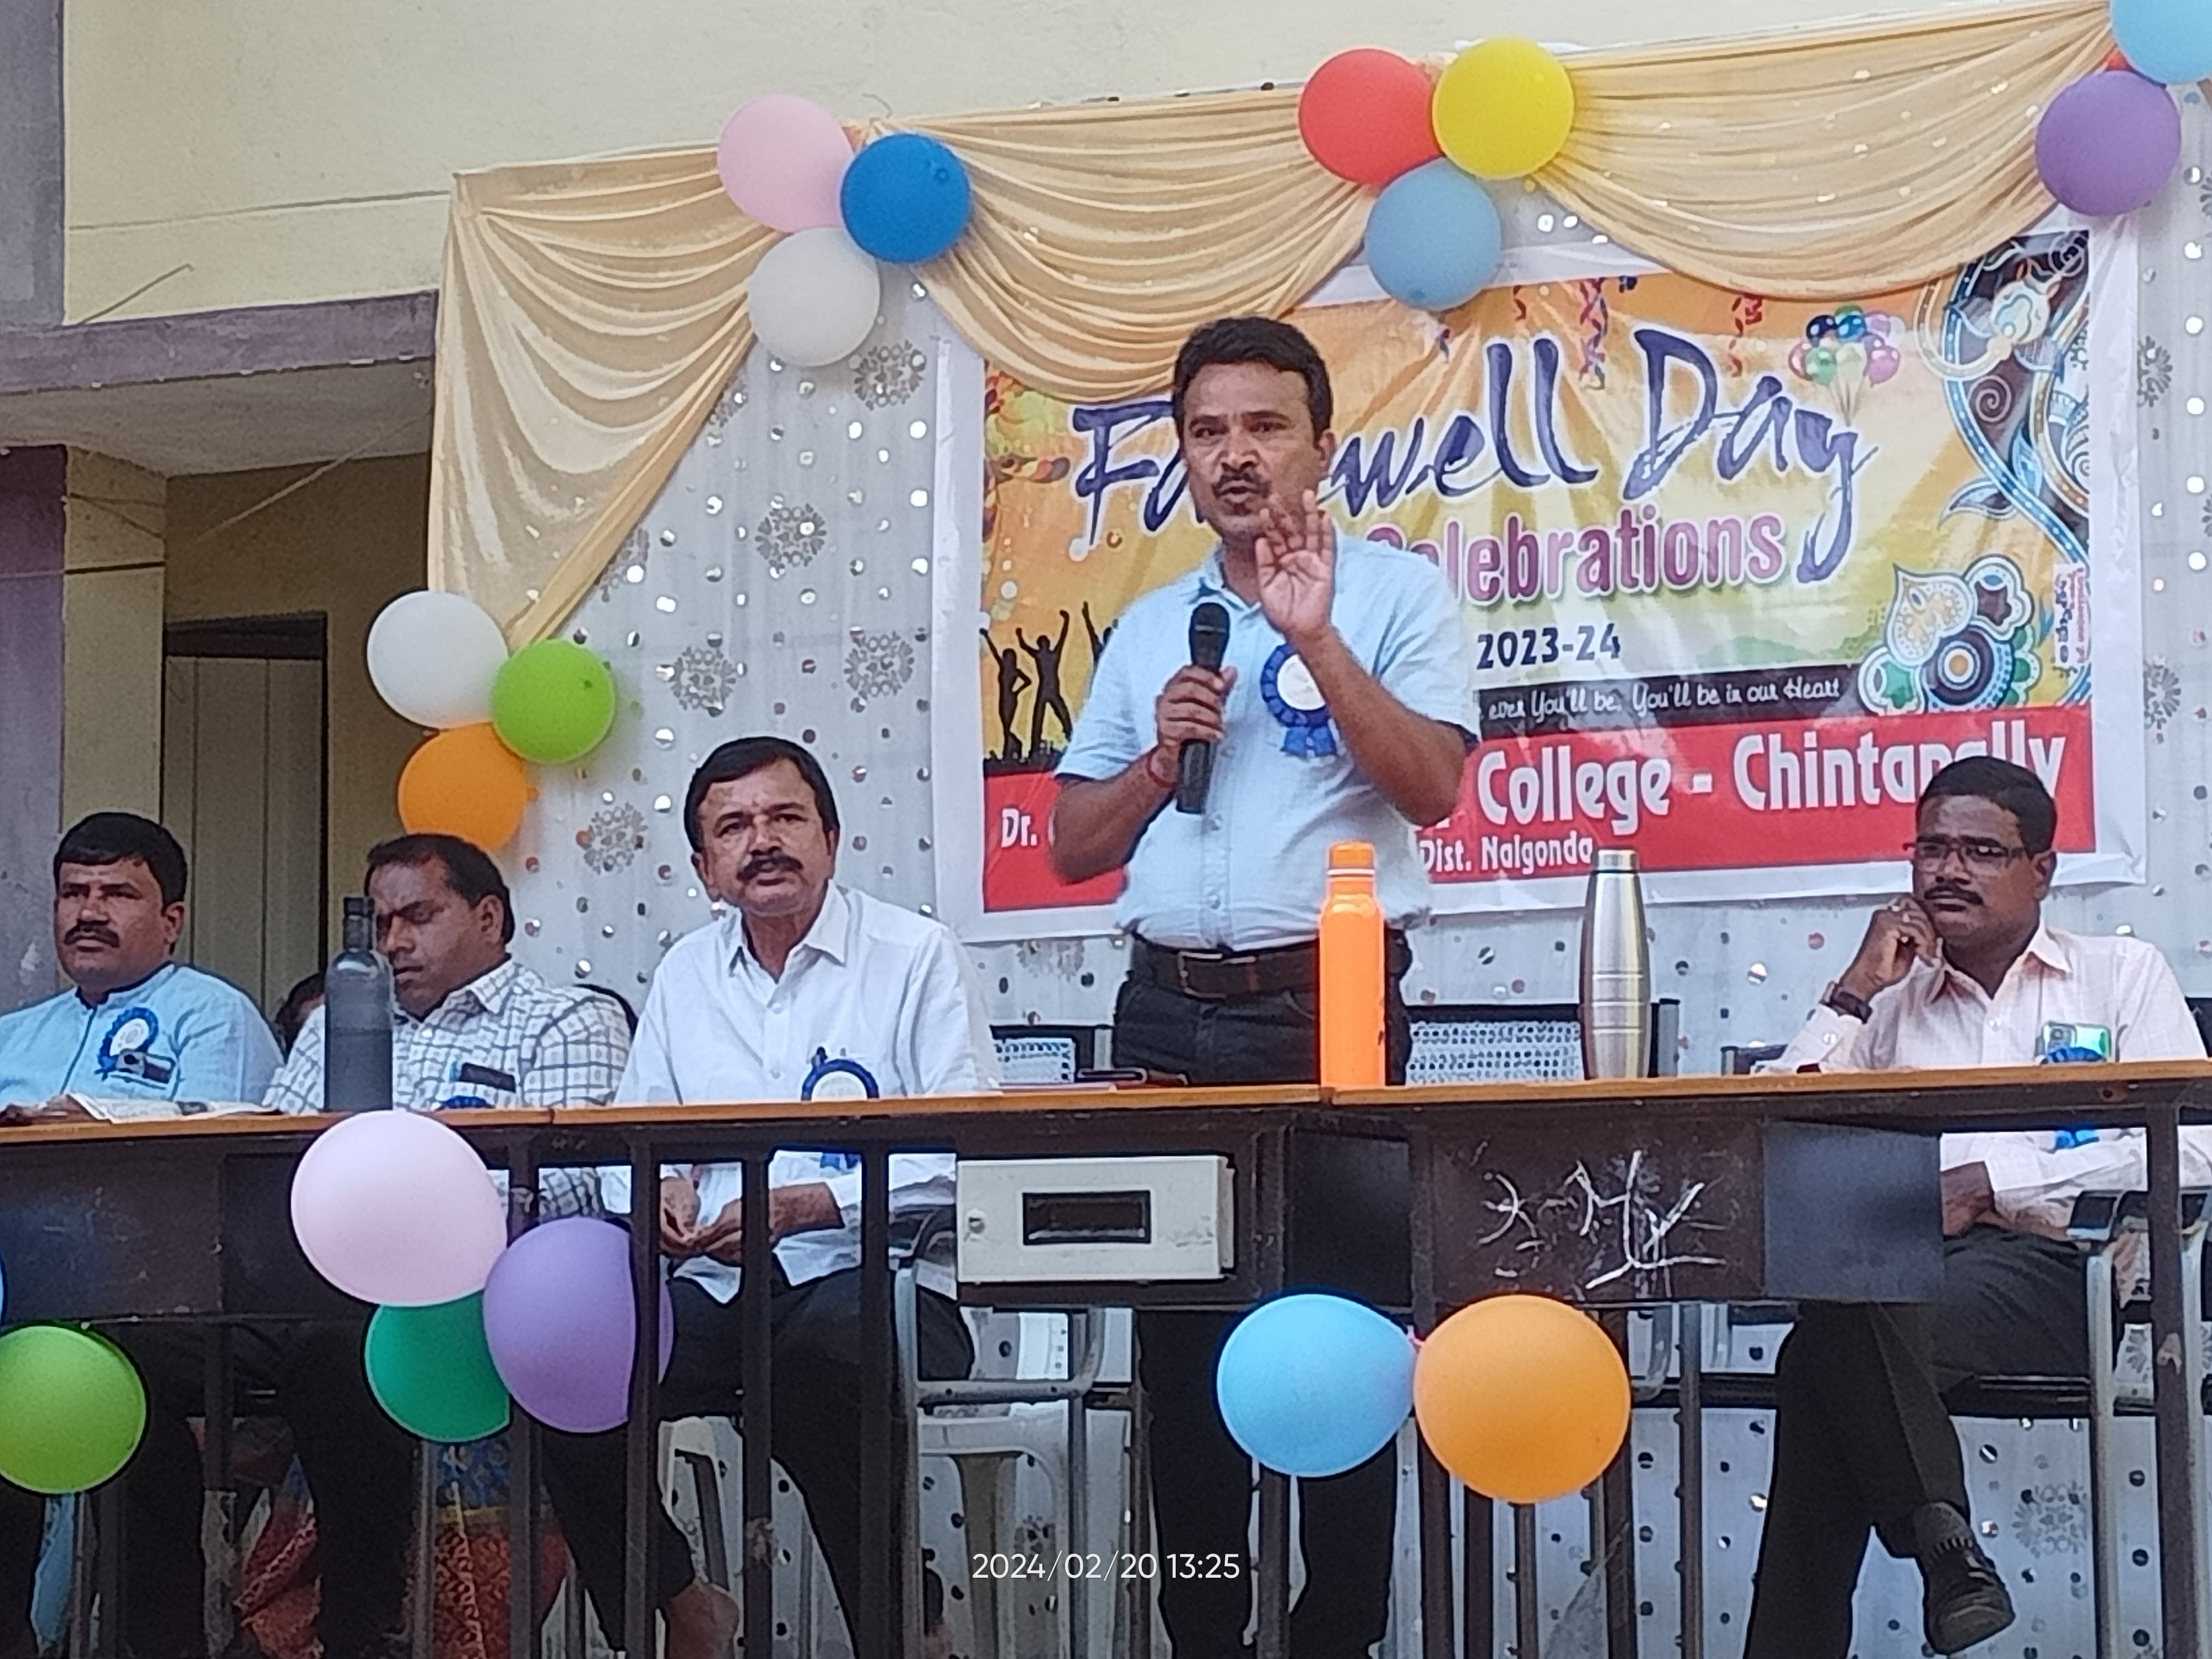 Farewell speech at chintapally AJR Government Jr. College